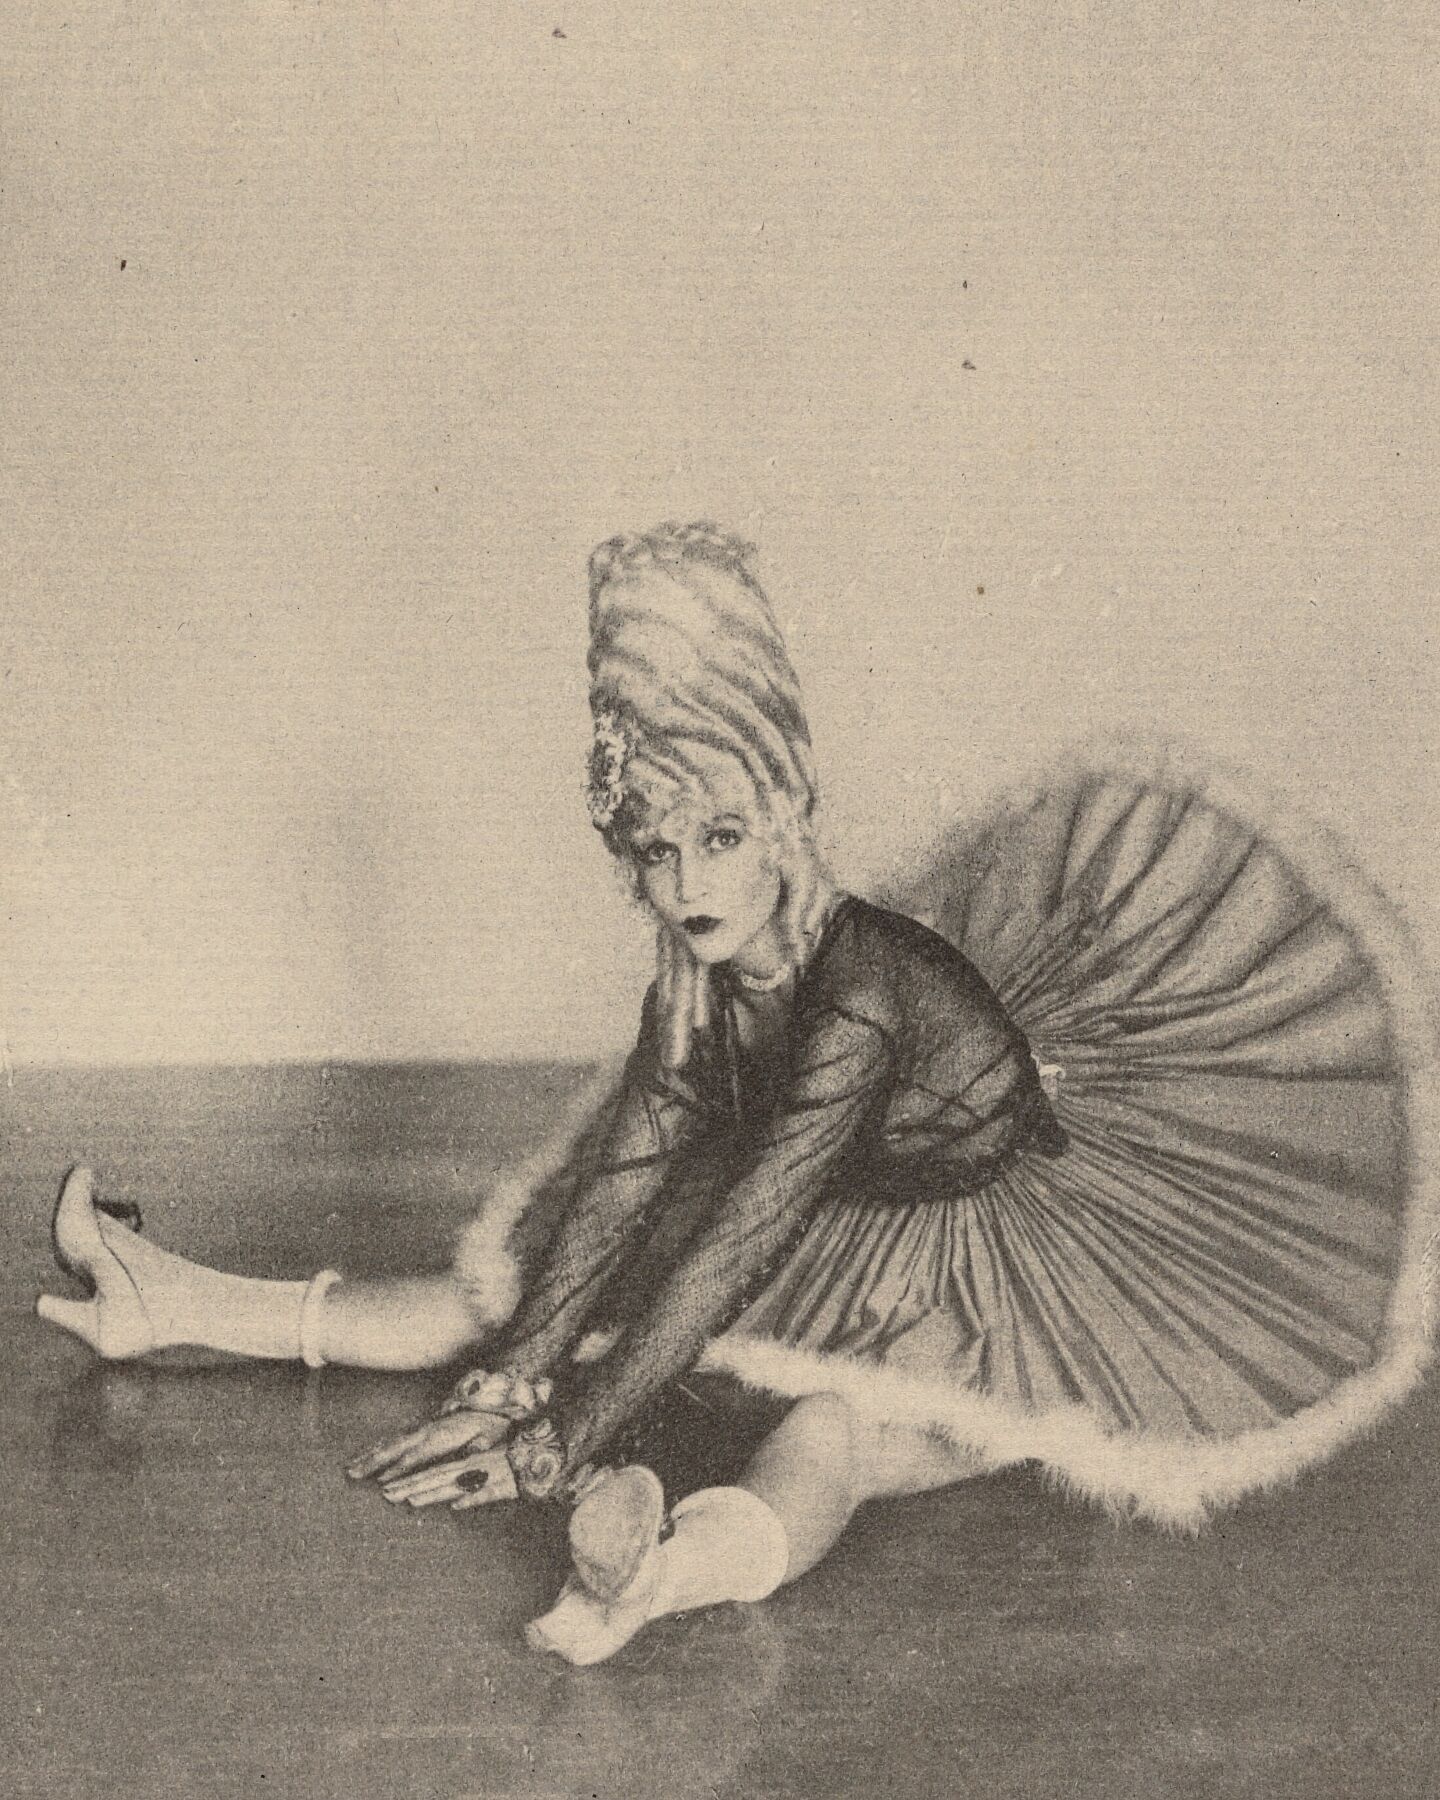 Woman in Can Can Costume Seated on Floor with Legs Spread Apart by Arthur F. Kales - c.1920